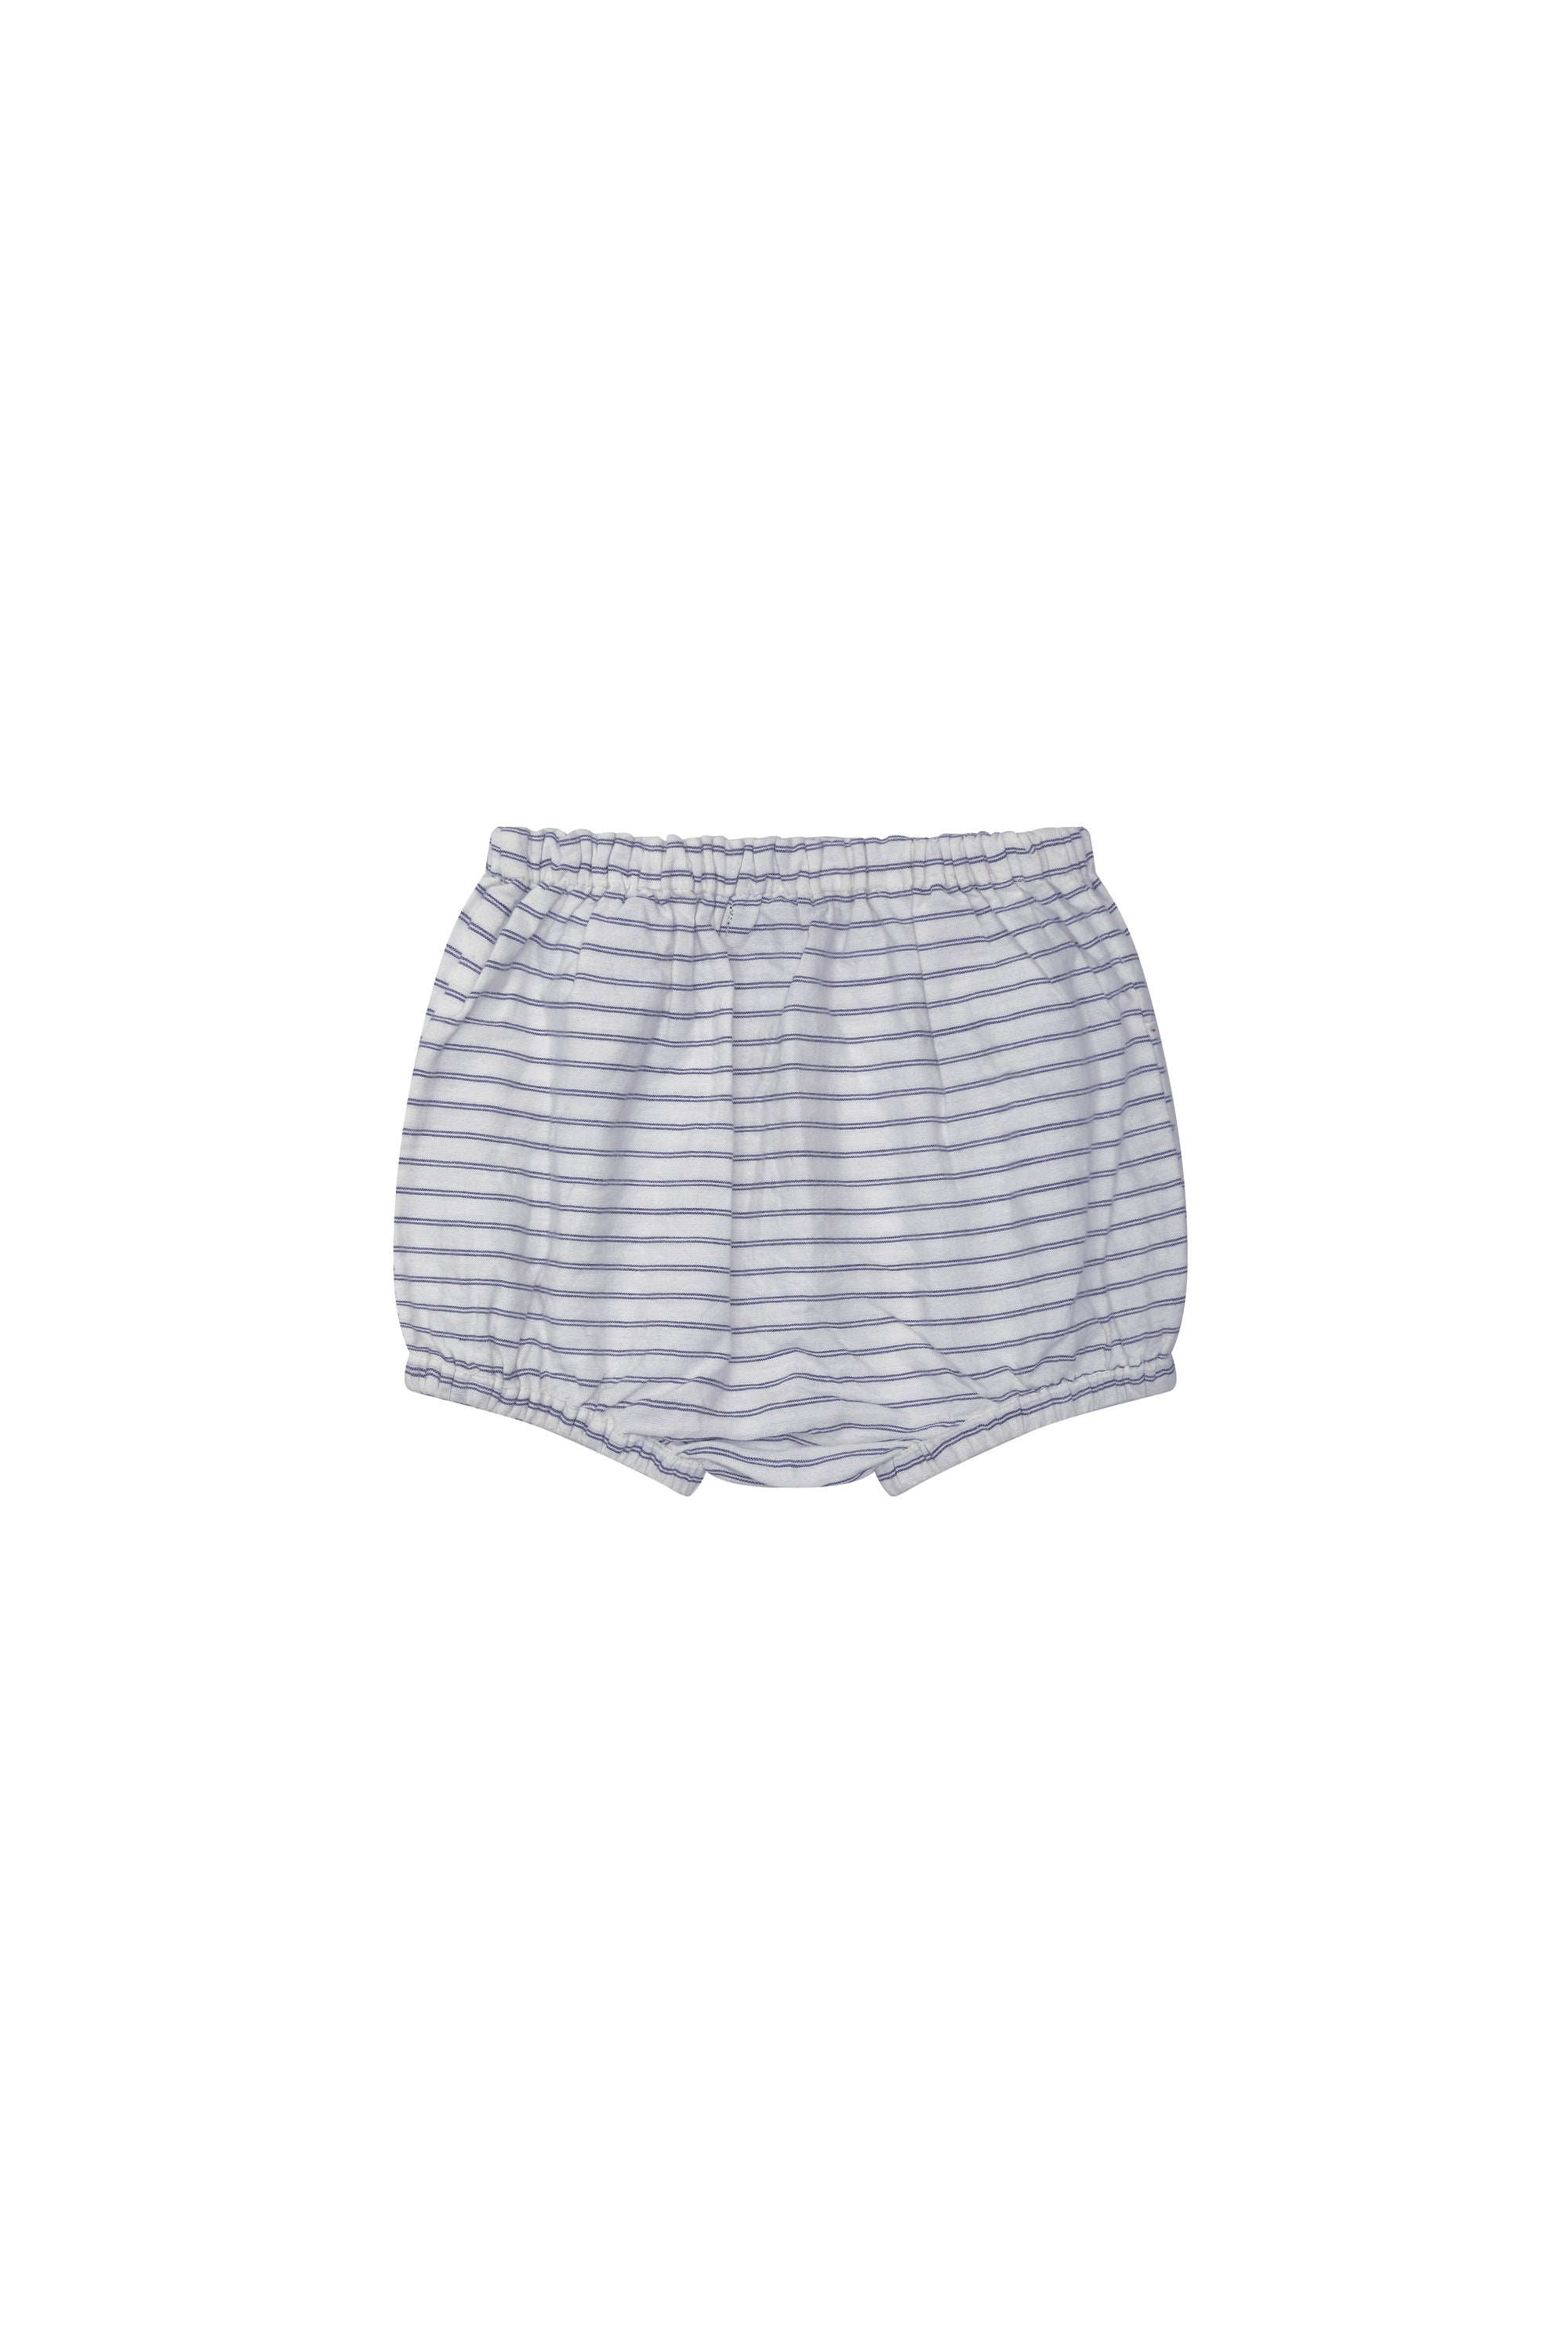 Clementine Button Front Shorts